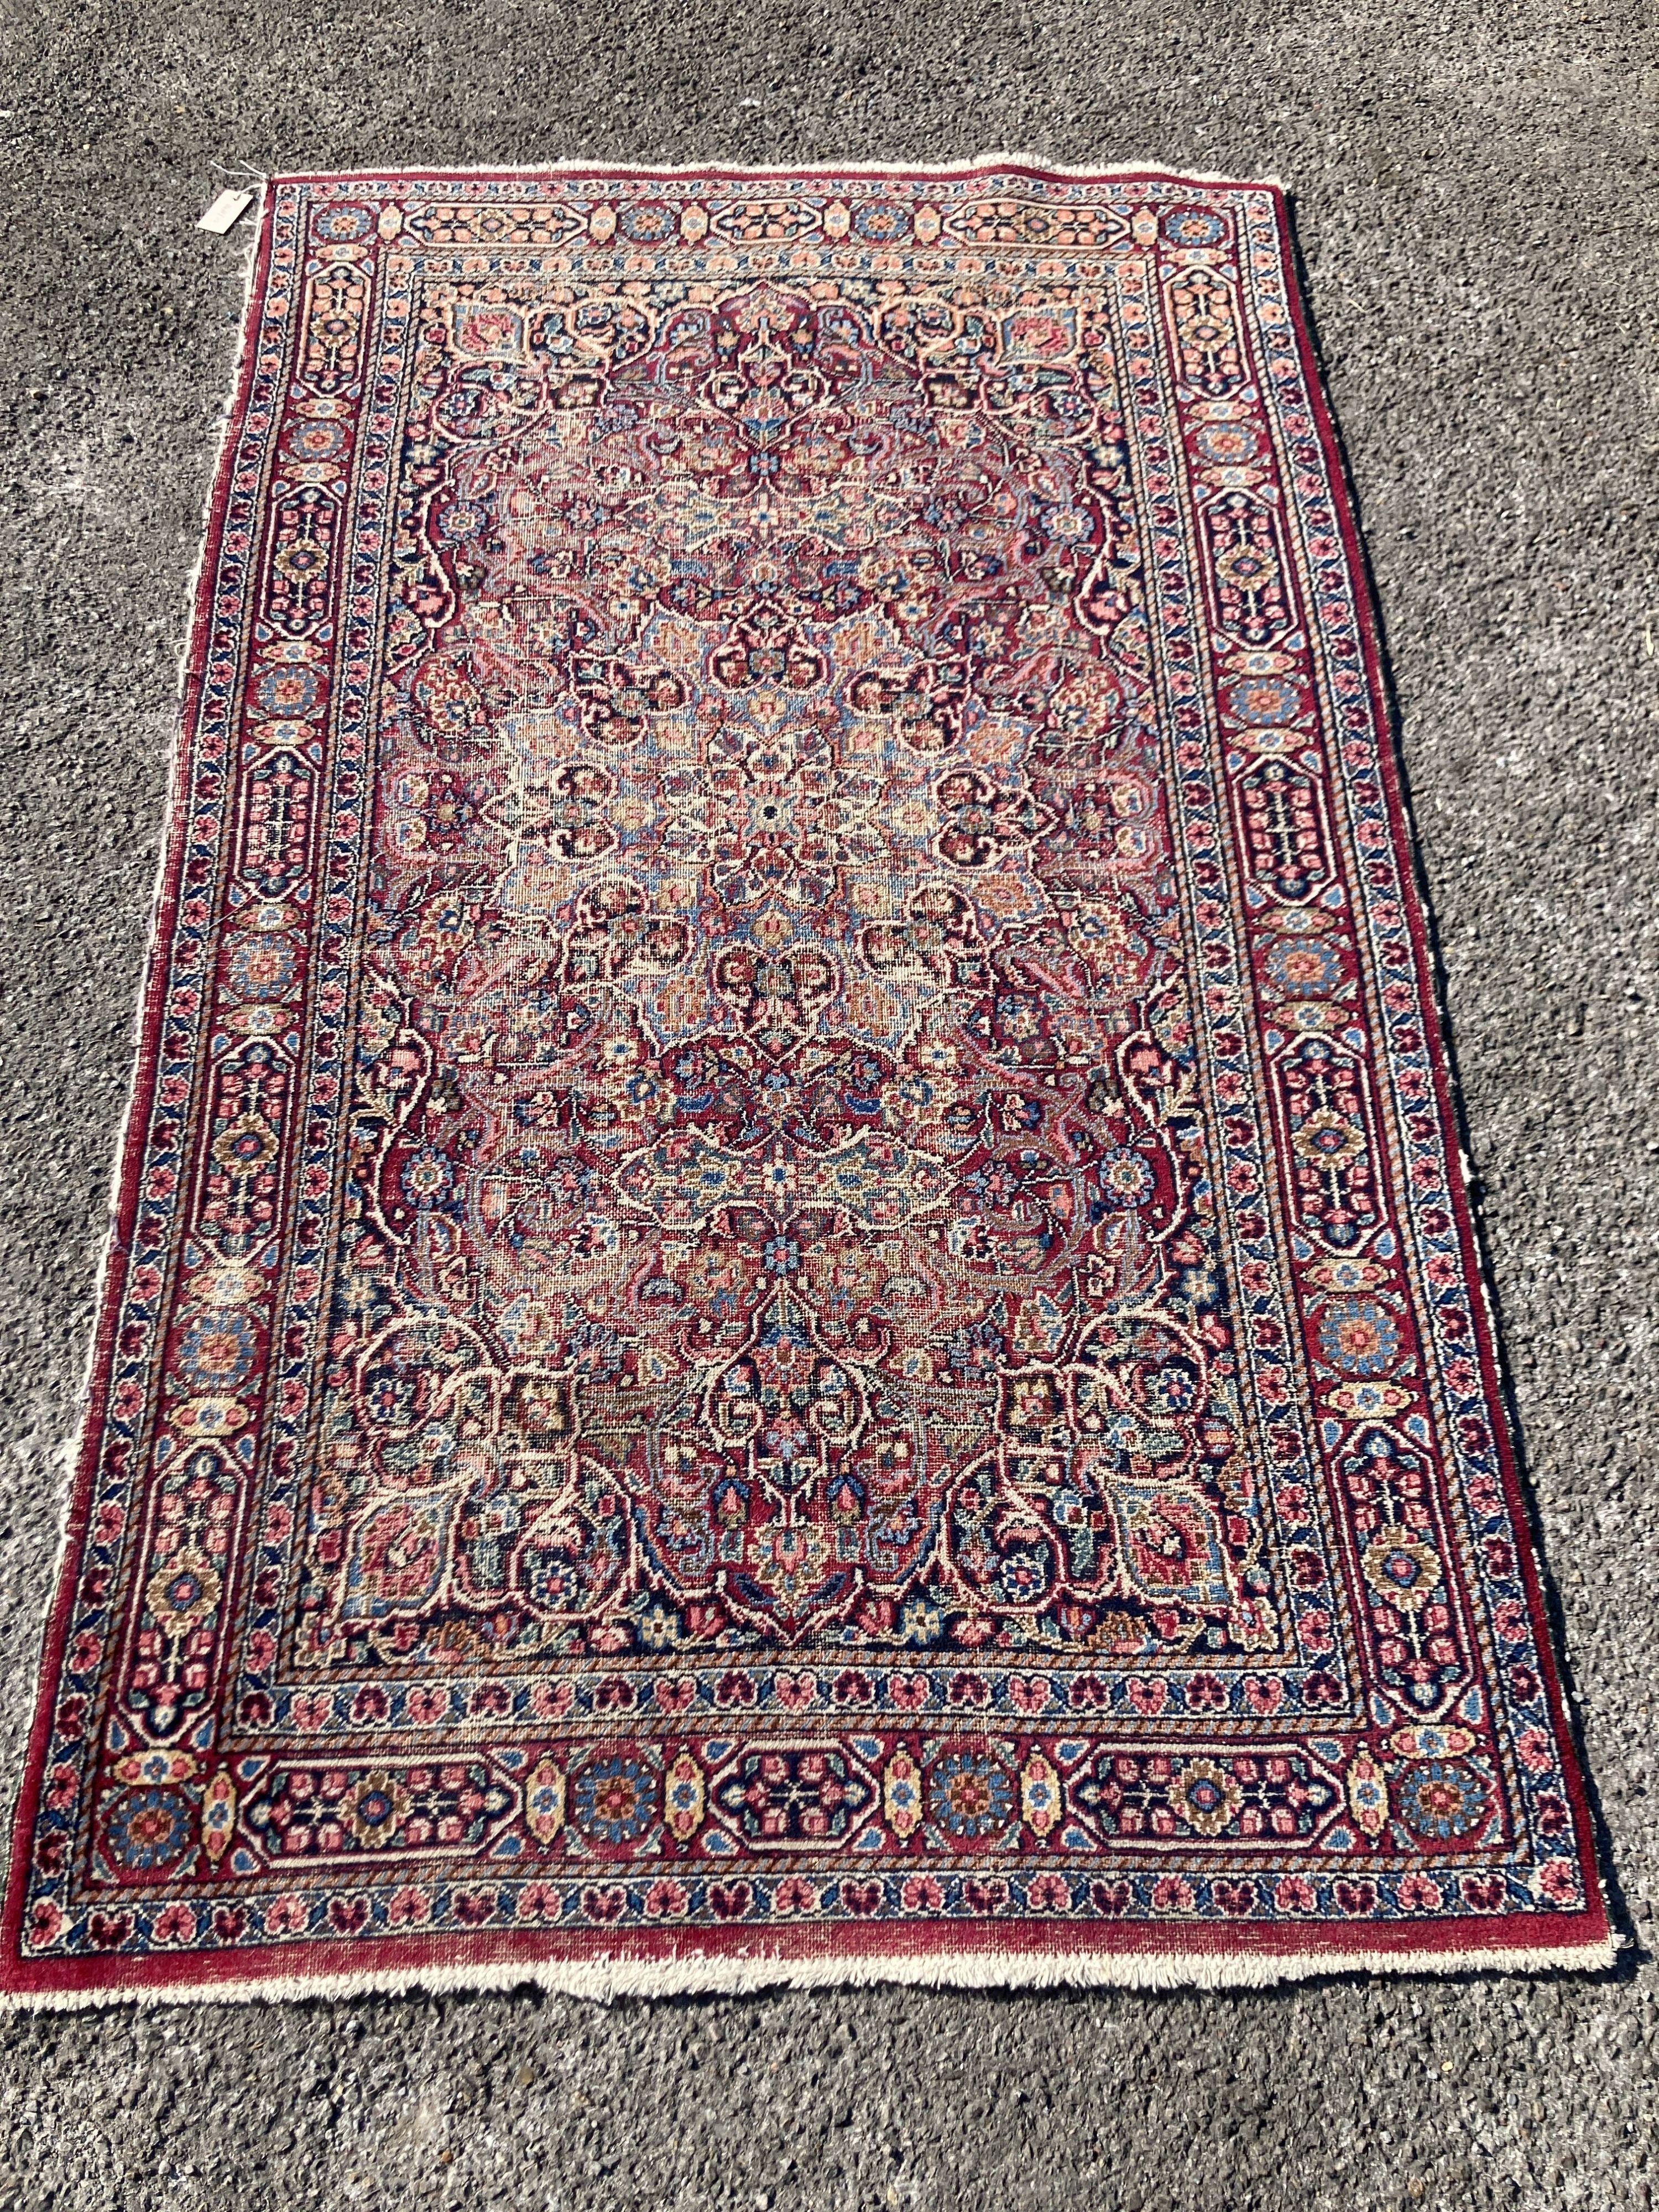 A North West Persian red ground rug (worn), 127 x 76cm                                                                                                                                                                      